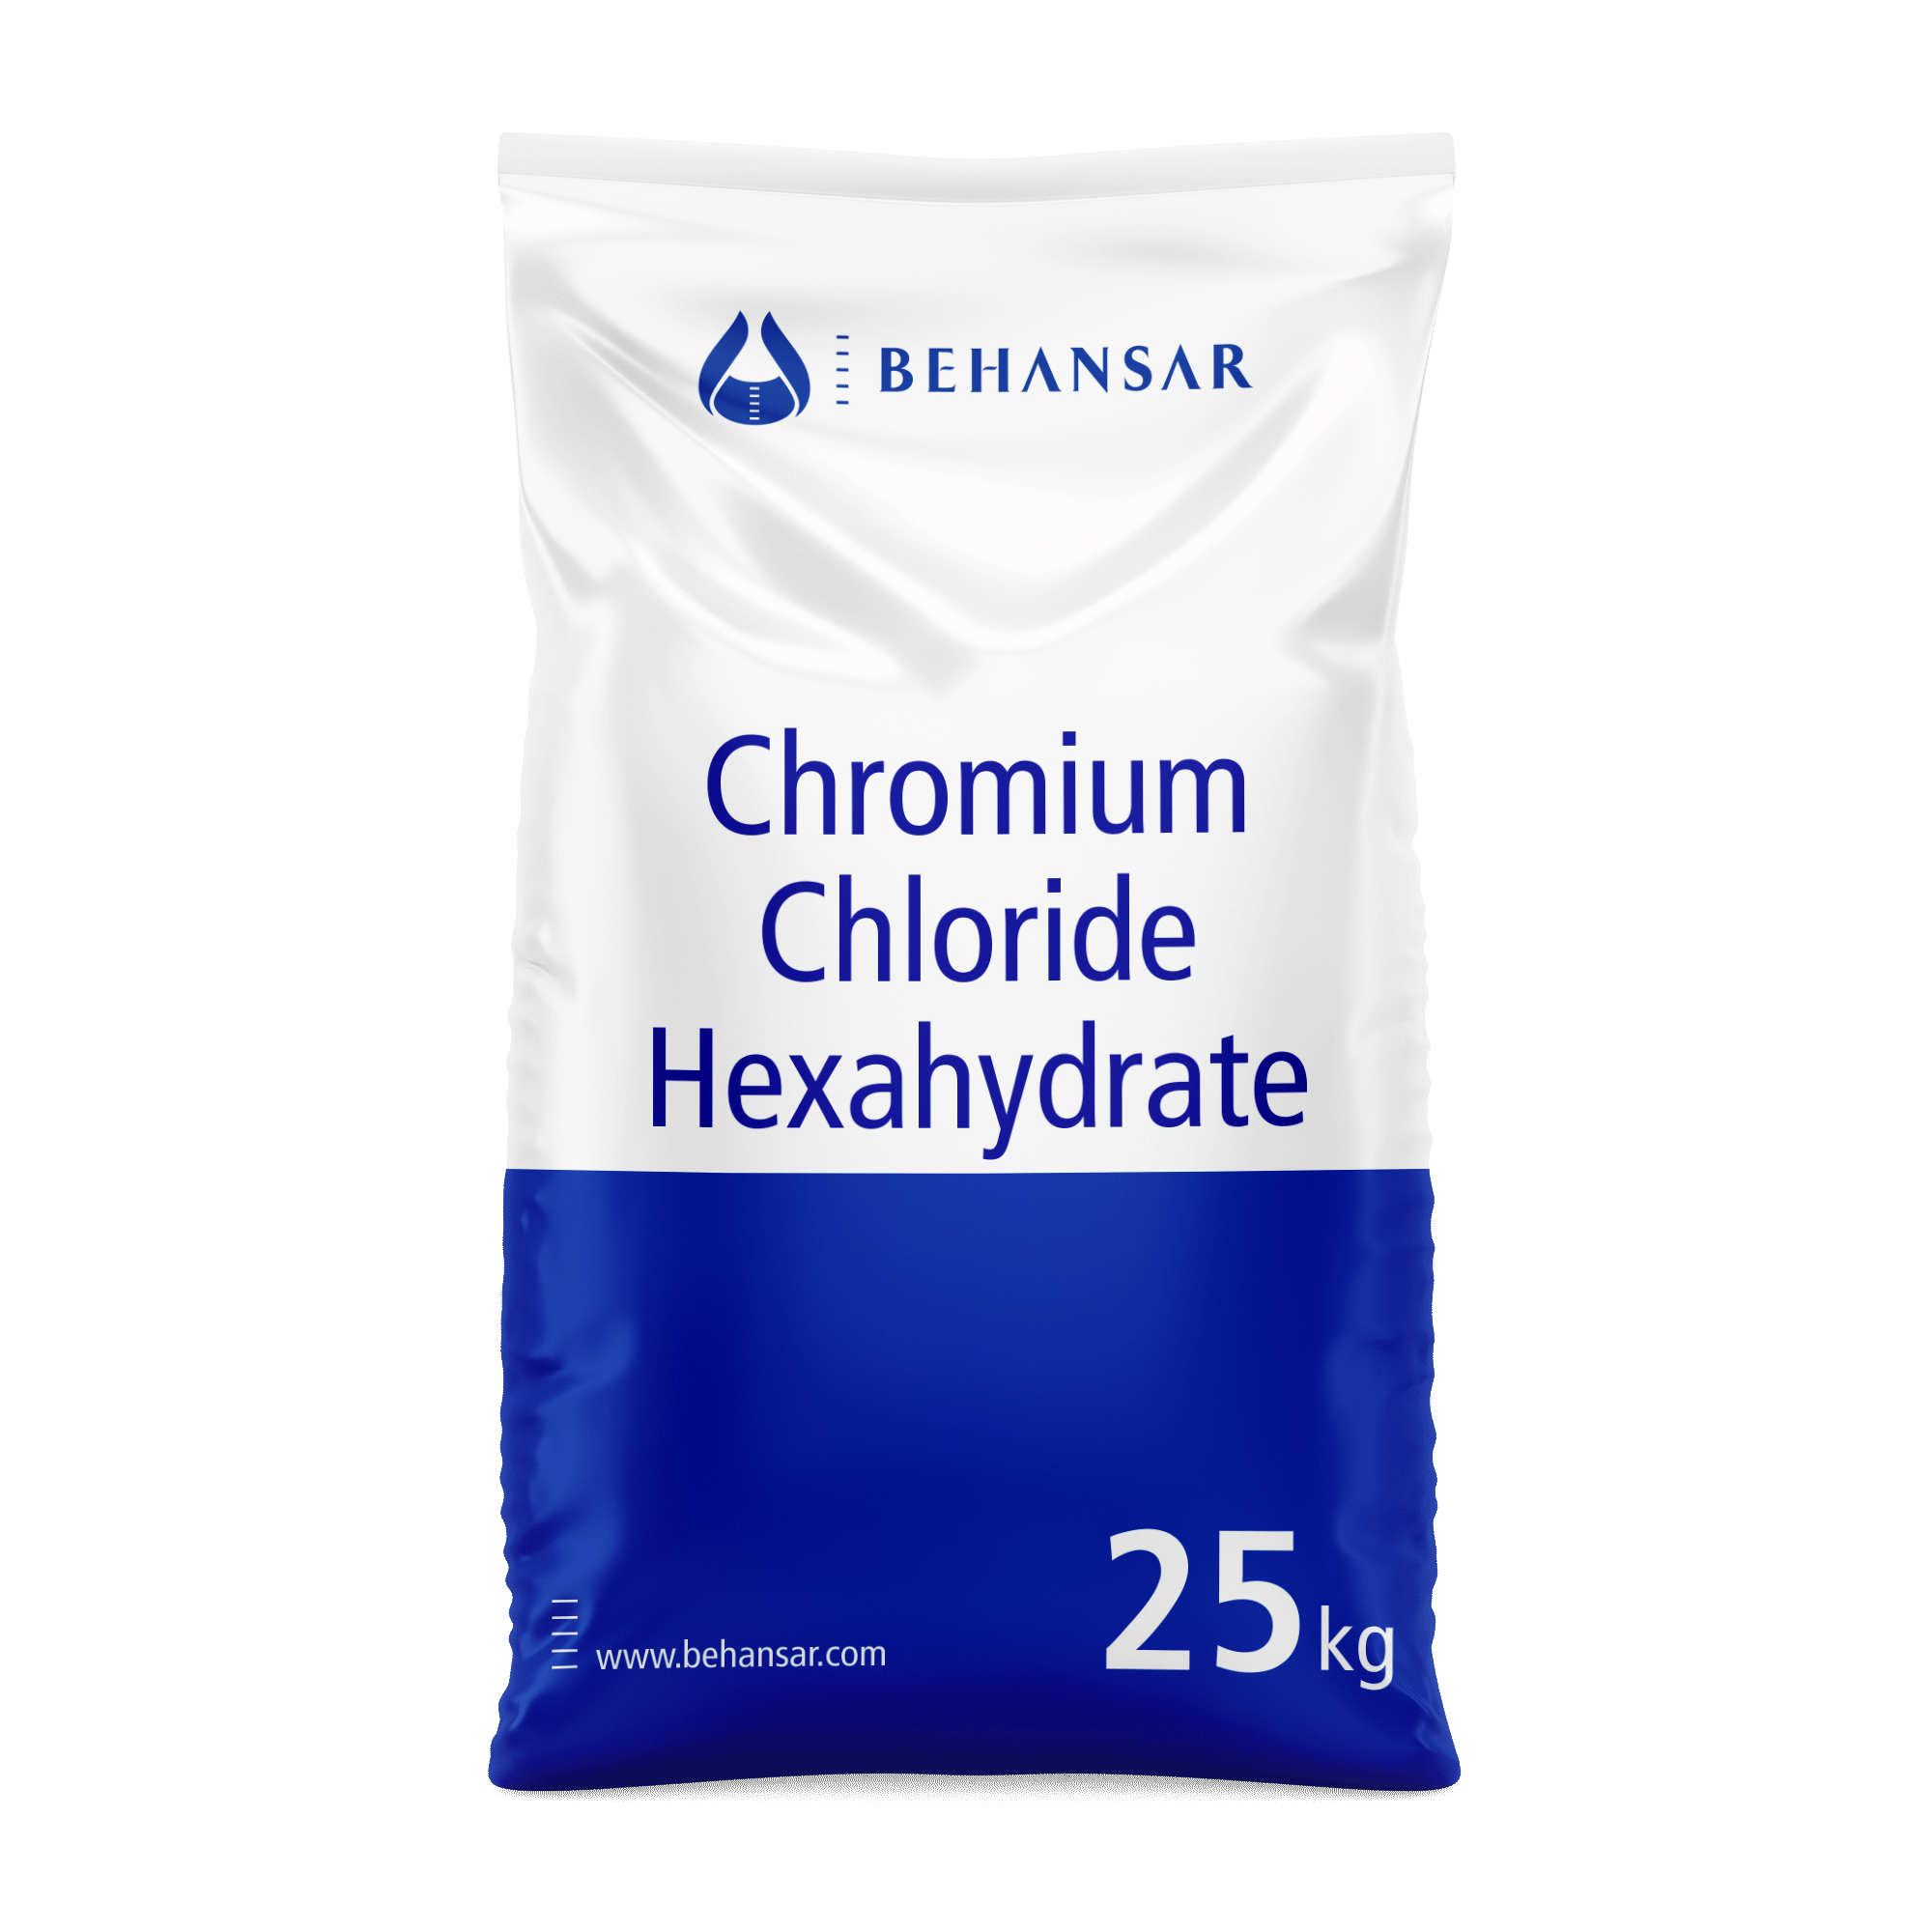 Chromium Chloride Hexahydrate is one of the products of Behansar Co